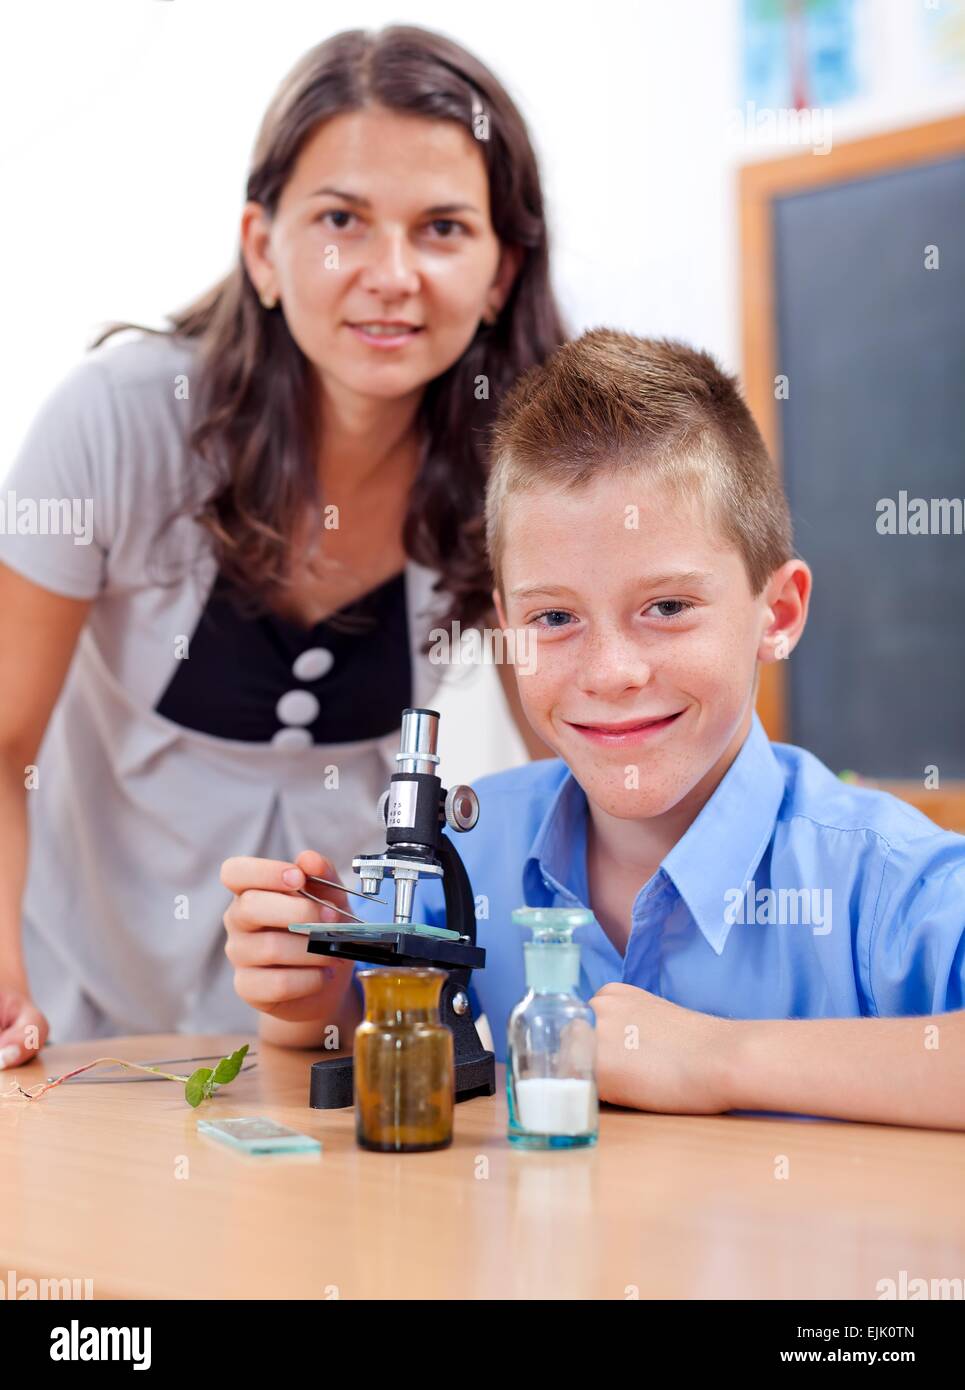 Wise boy with microscope and the biology teacher Stock Photo